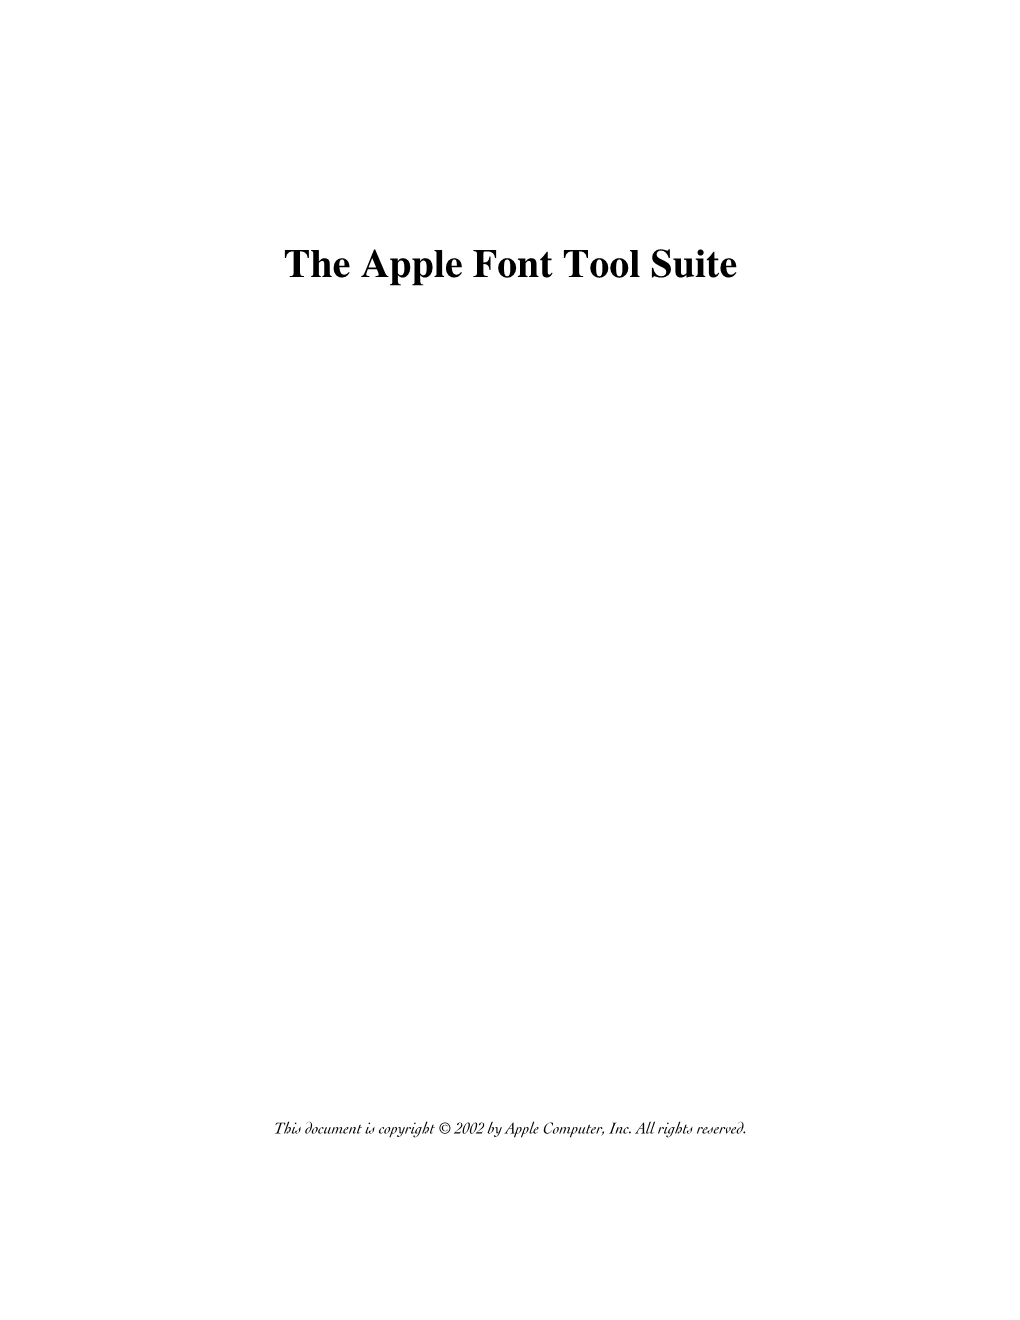 The Apple Font Tool Suite